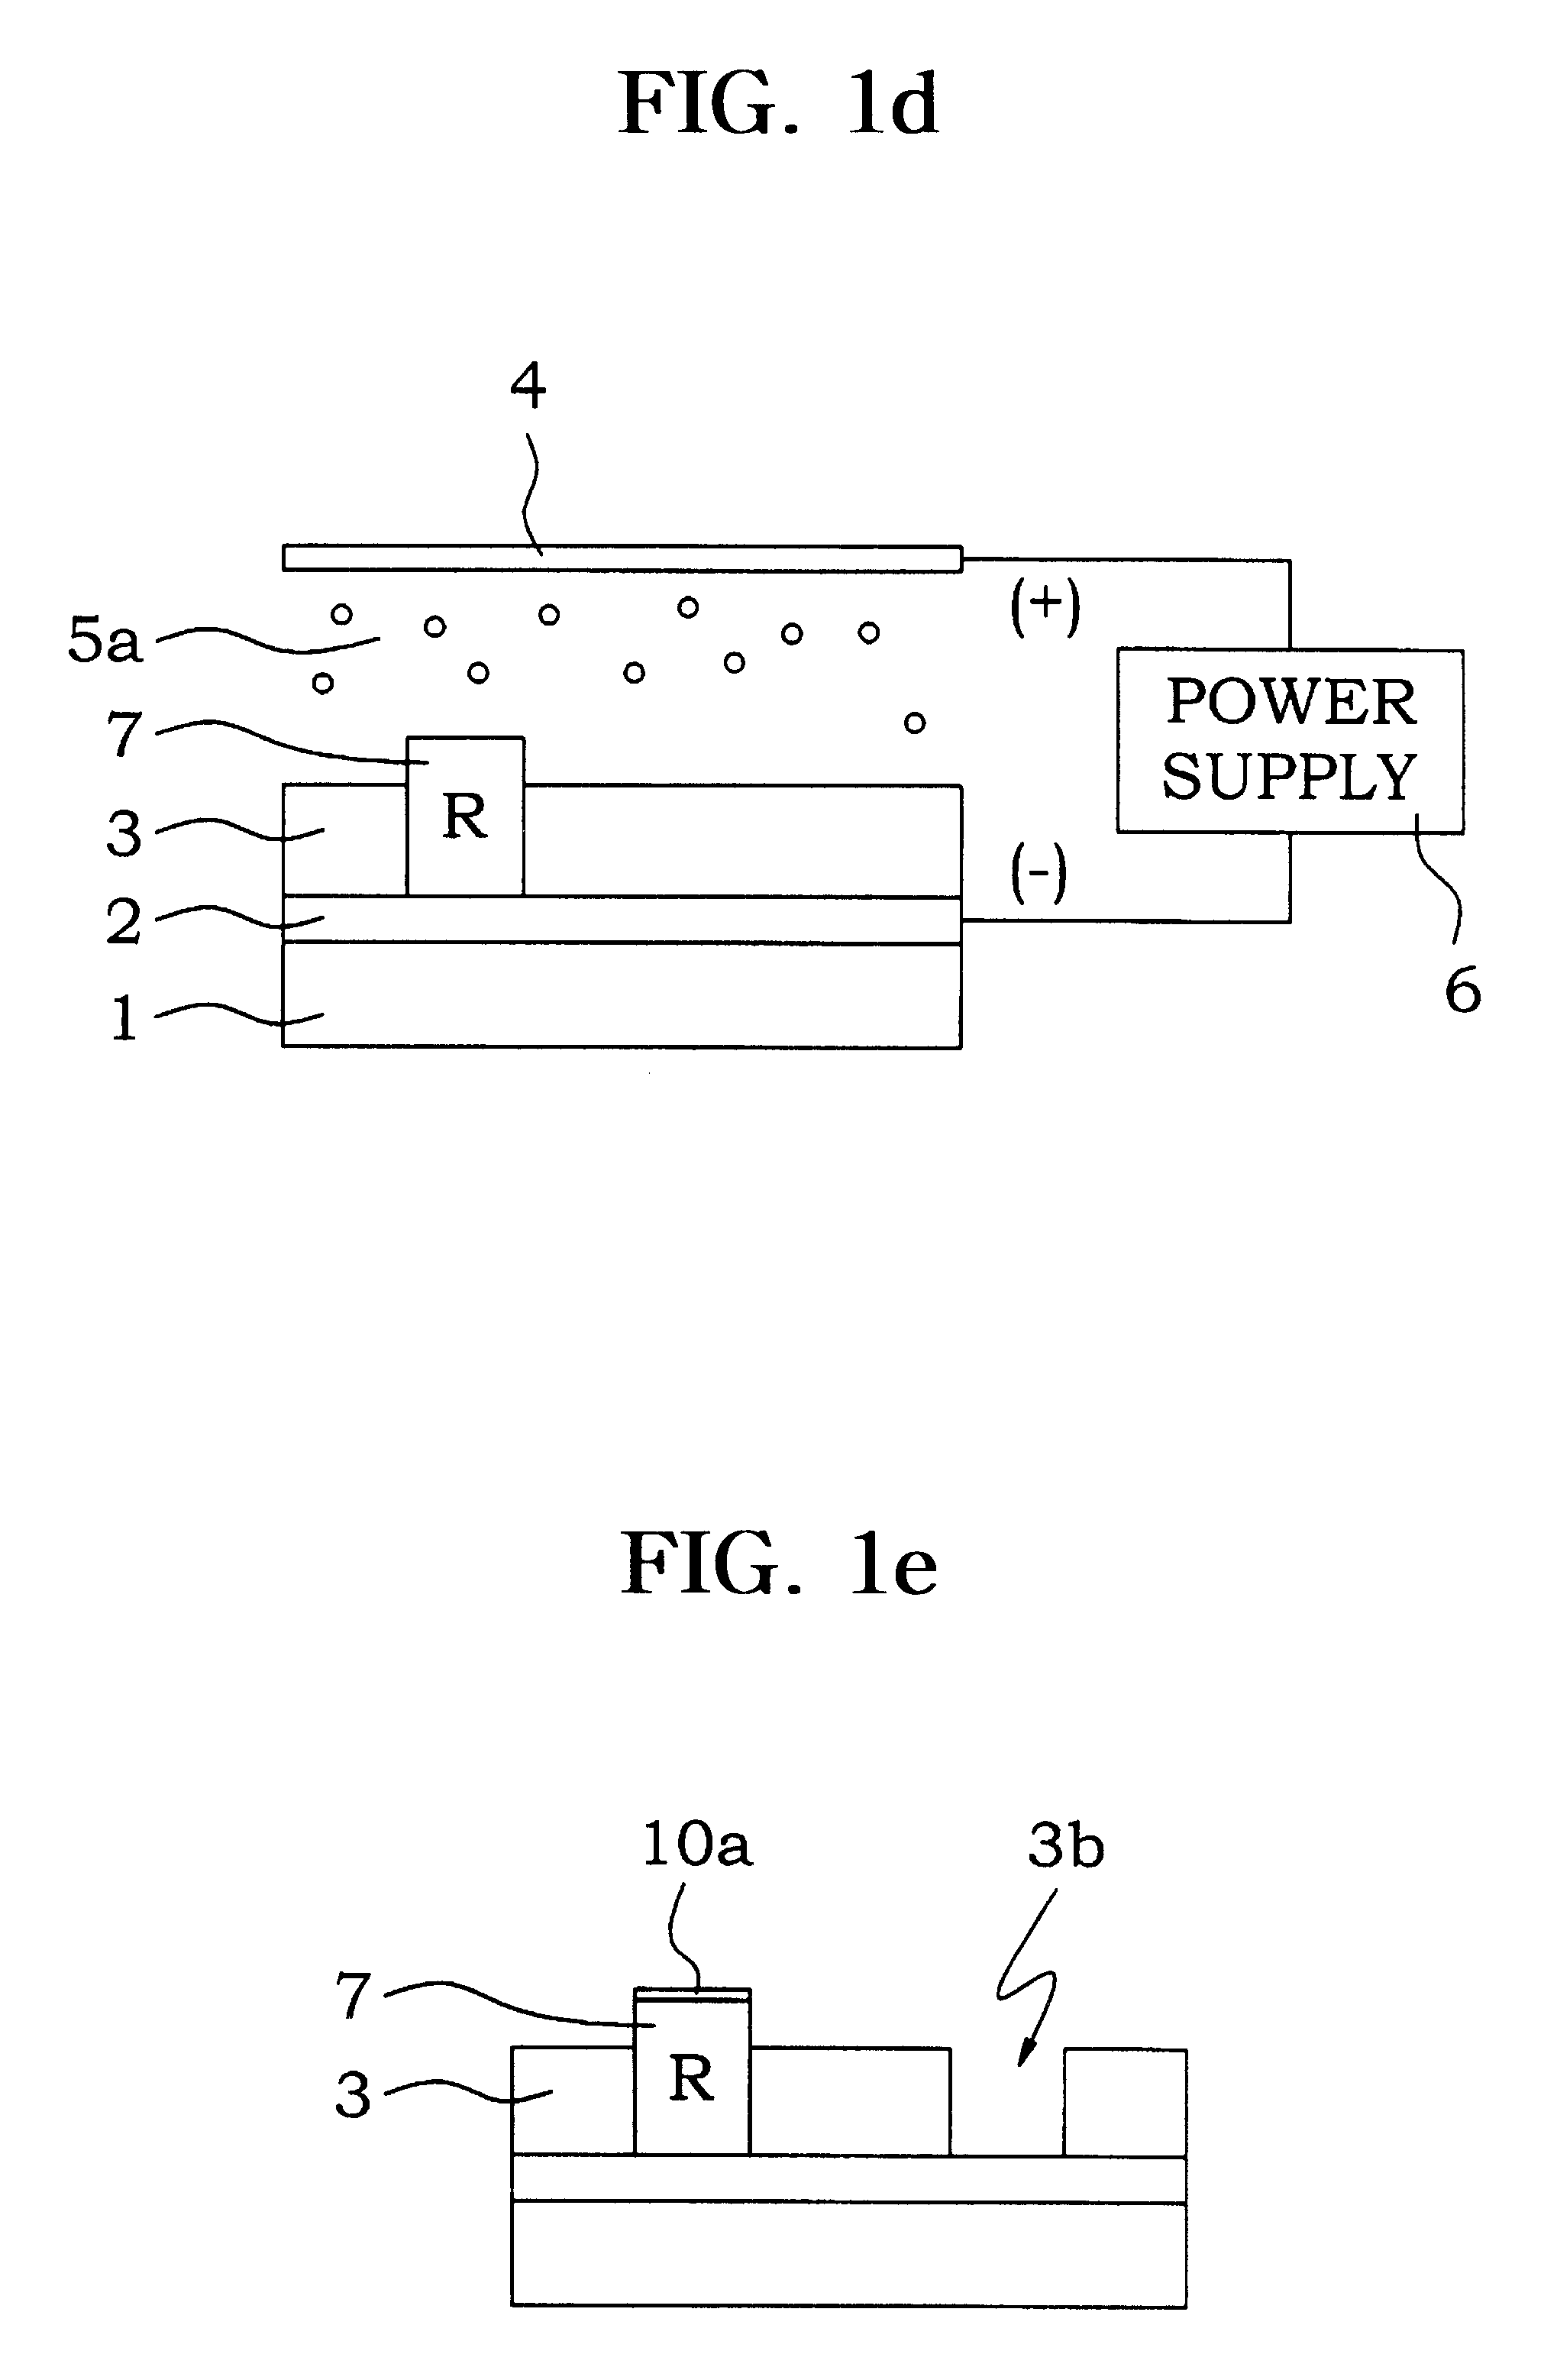 Method for phosphor coating on flat display using electrophoretic deposition and photolithography